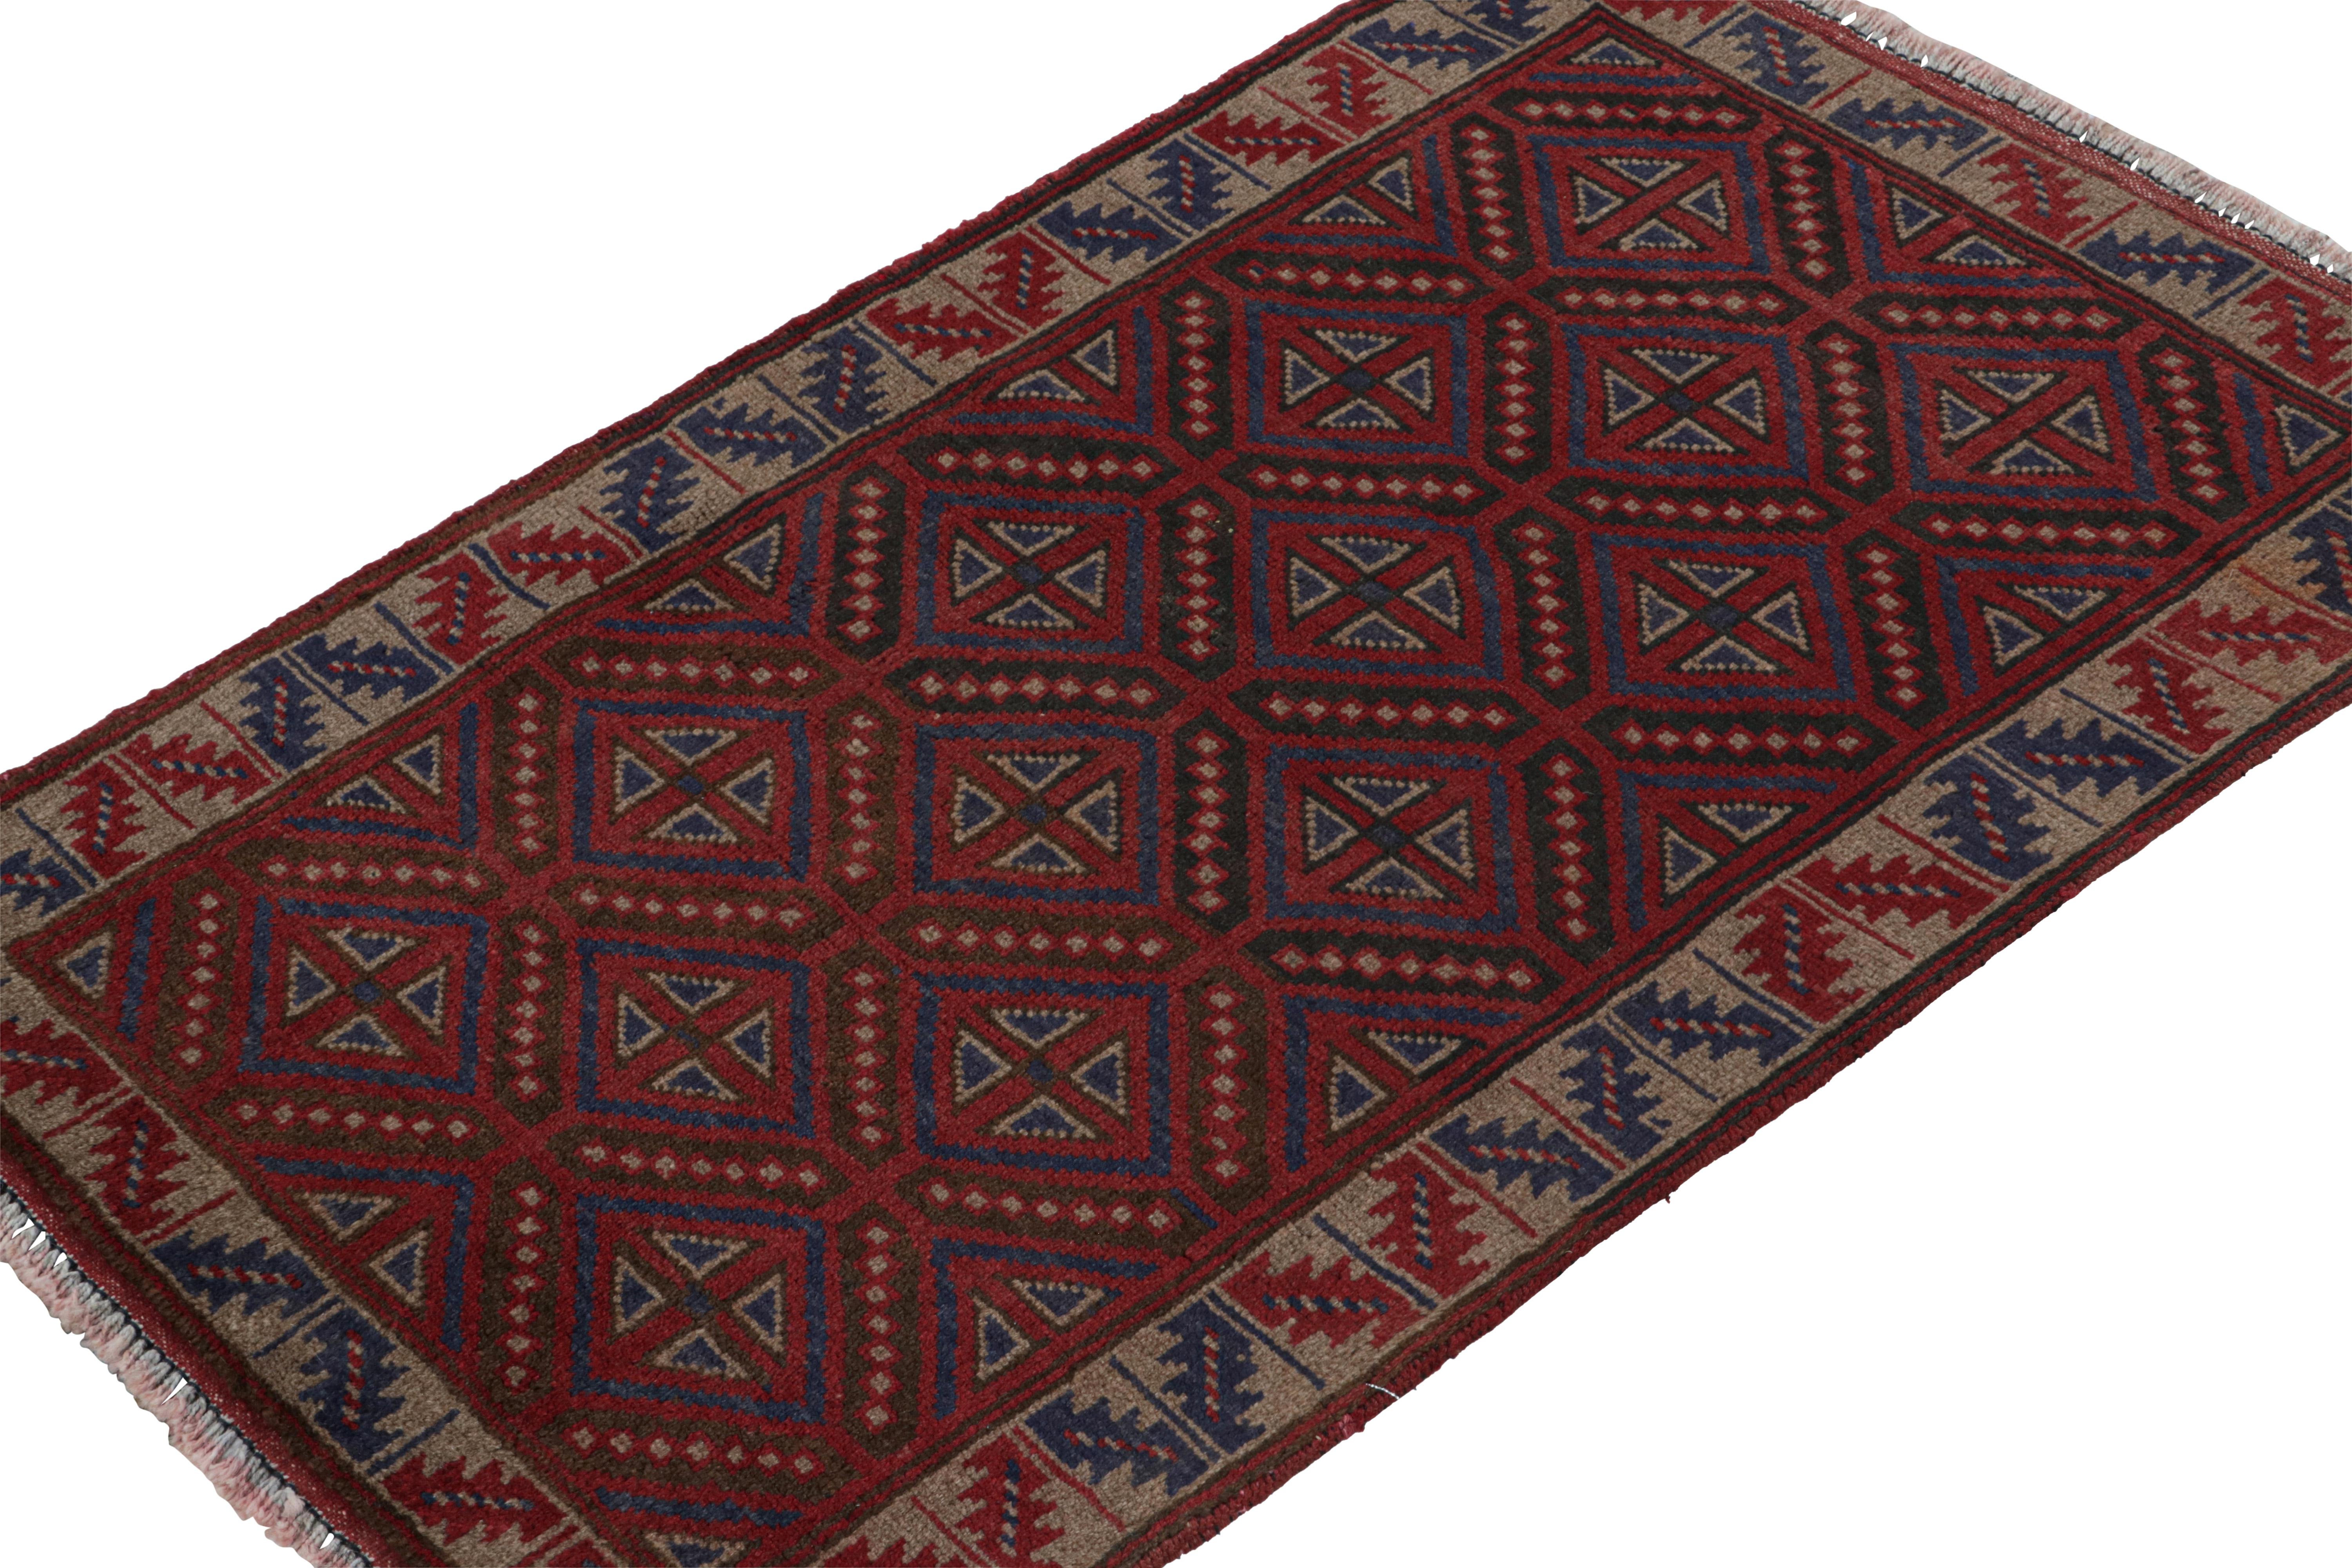 Hand-knotted in wool and goat hair circa 1950-1960, this vintage Baluch tribal rug is a new curation from the Rug & Kilim collection.  

On the Design:

This piece enjoys geometric patterns in rich tones of red and navy blue, and a beige border.